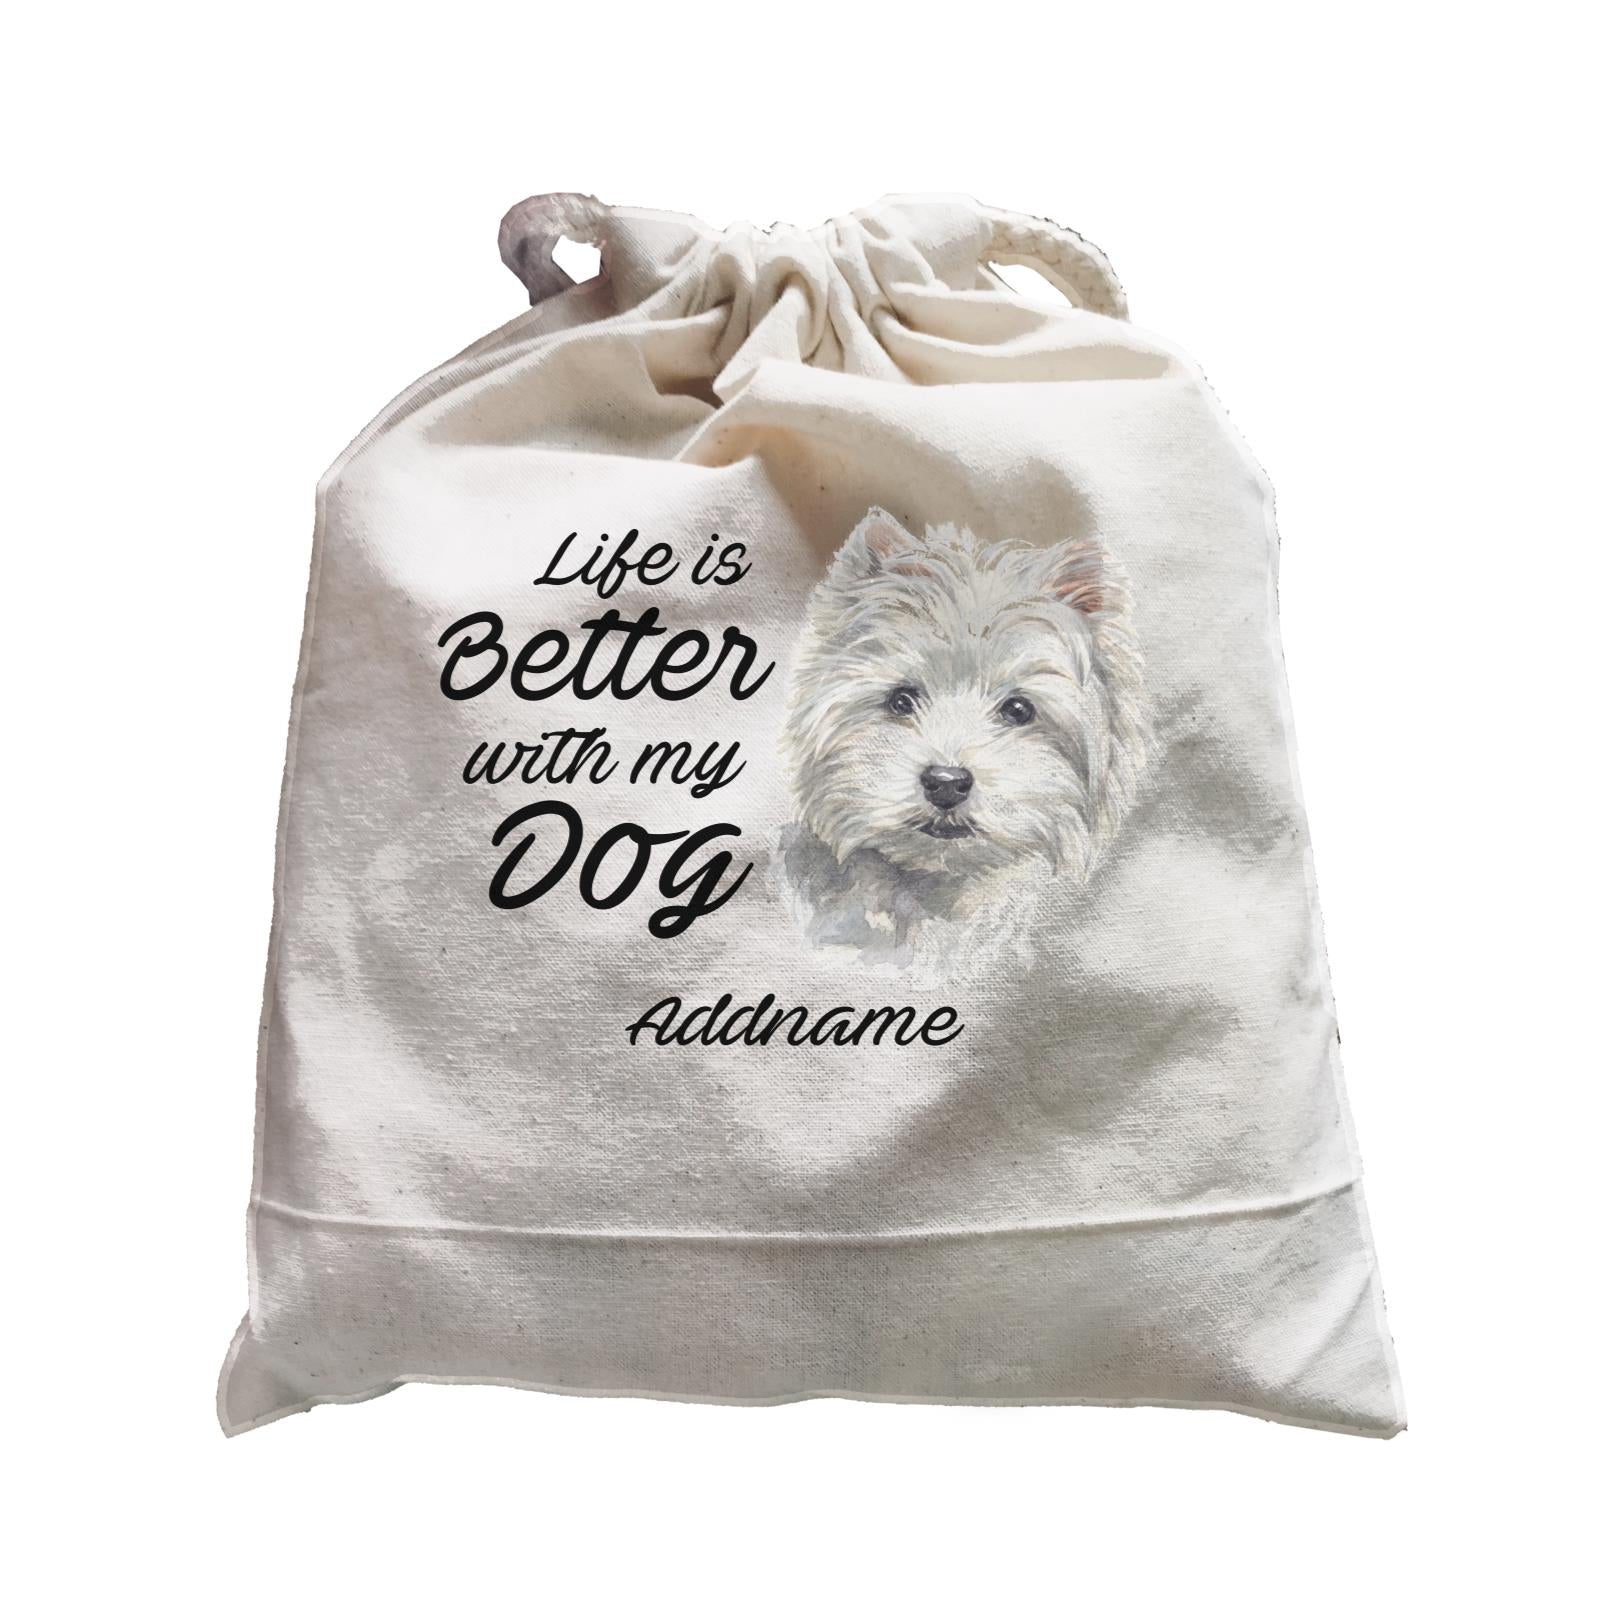 Watercolor Life is Better With My Dog West Highland White Terrier Addname Satchel